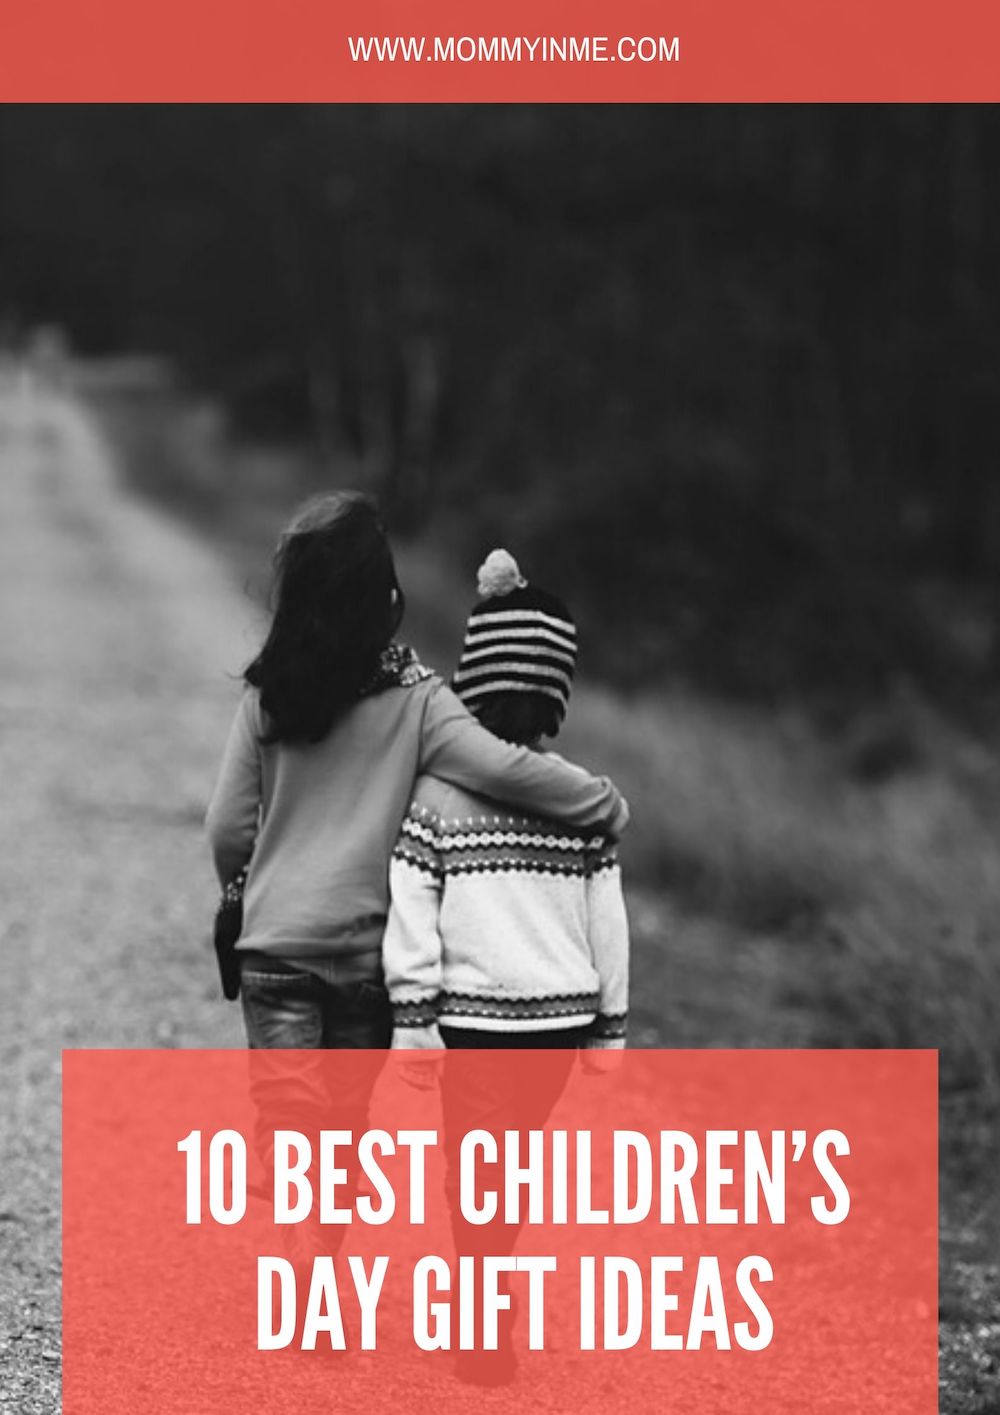 10 best Children’s day gift ideas #HappyChildrensDay . Children love receiving gifts, not necessarily the expensive ones. Even a small gift can bring that sparkle in their eyes and a bright smile on their innocent faces. So here are some quick gift ideas for your children. #gifting #gift #giftideas #childrensday